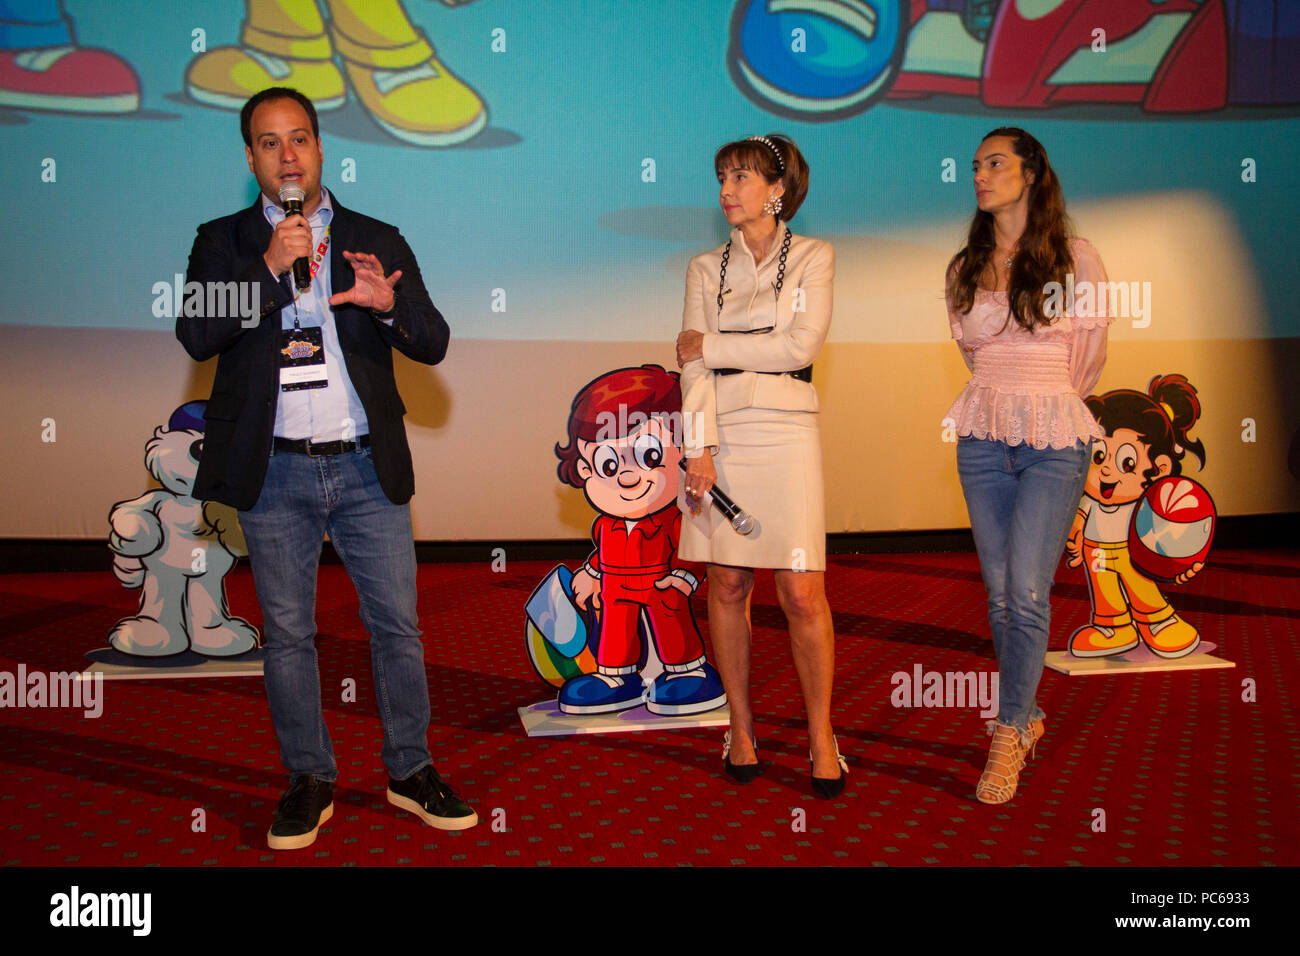 SÃO PAULO, SP - 31.07.2018: ANIMAÇÃO DO SENNINHA É LANÇADA EM SP - This event was held on Tuesday (31) the launch event of the new animated series of the character Senninha that will premiere on 08/08 on Gloobat&#39;s Glat cat channel. The animation that is inspired by three-time For 1 champion Ayrton Senna is called &quotquot;Senninha na Pista Maluca&quot; (&amotquot;Senninha na Pista Maluca&quot;), h has 26 episodes, each withwith 11 minutes, which will be shown daily arious times. No highlight is the executive dve director of Globosat Paulo Daudt Marinho alongside Viviane Senna, president o Stock Photo